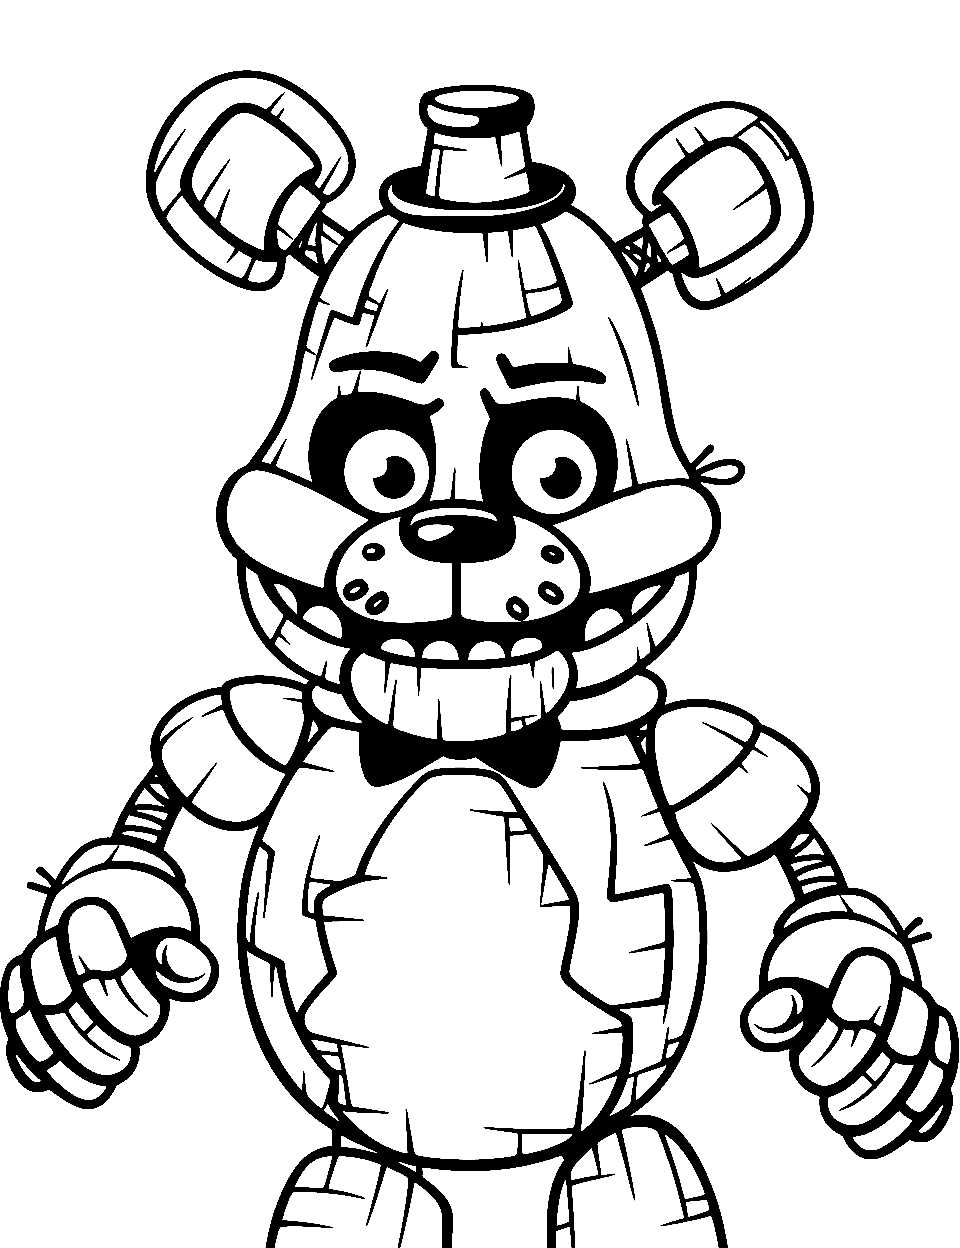 25 Free Five Nights At Freddy's Coloring Pages for Fans